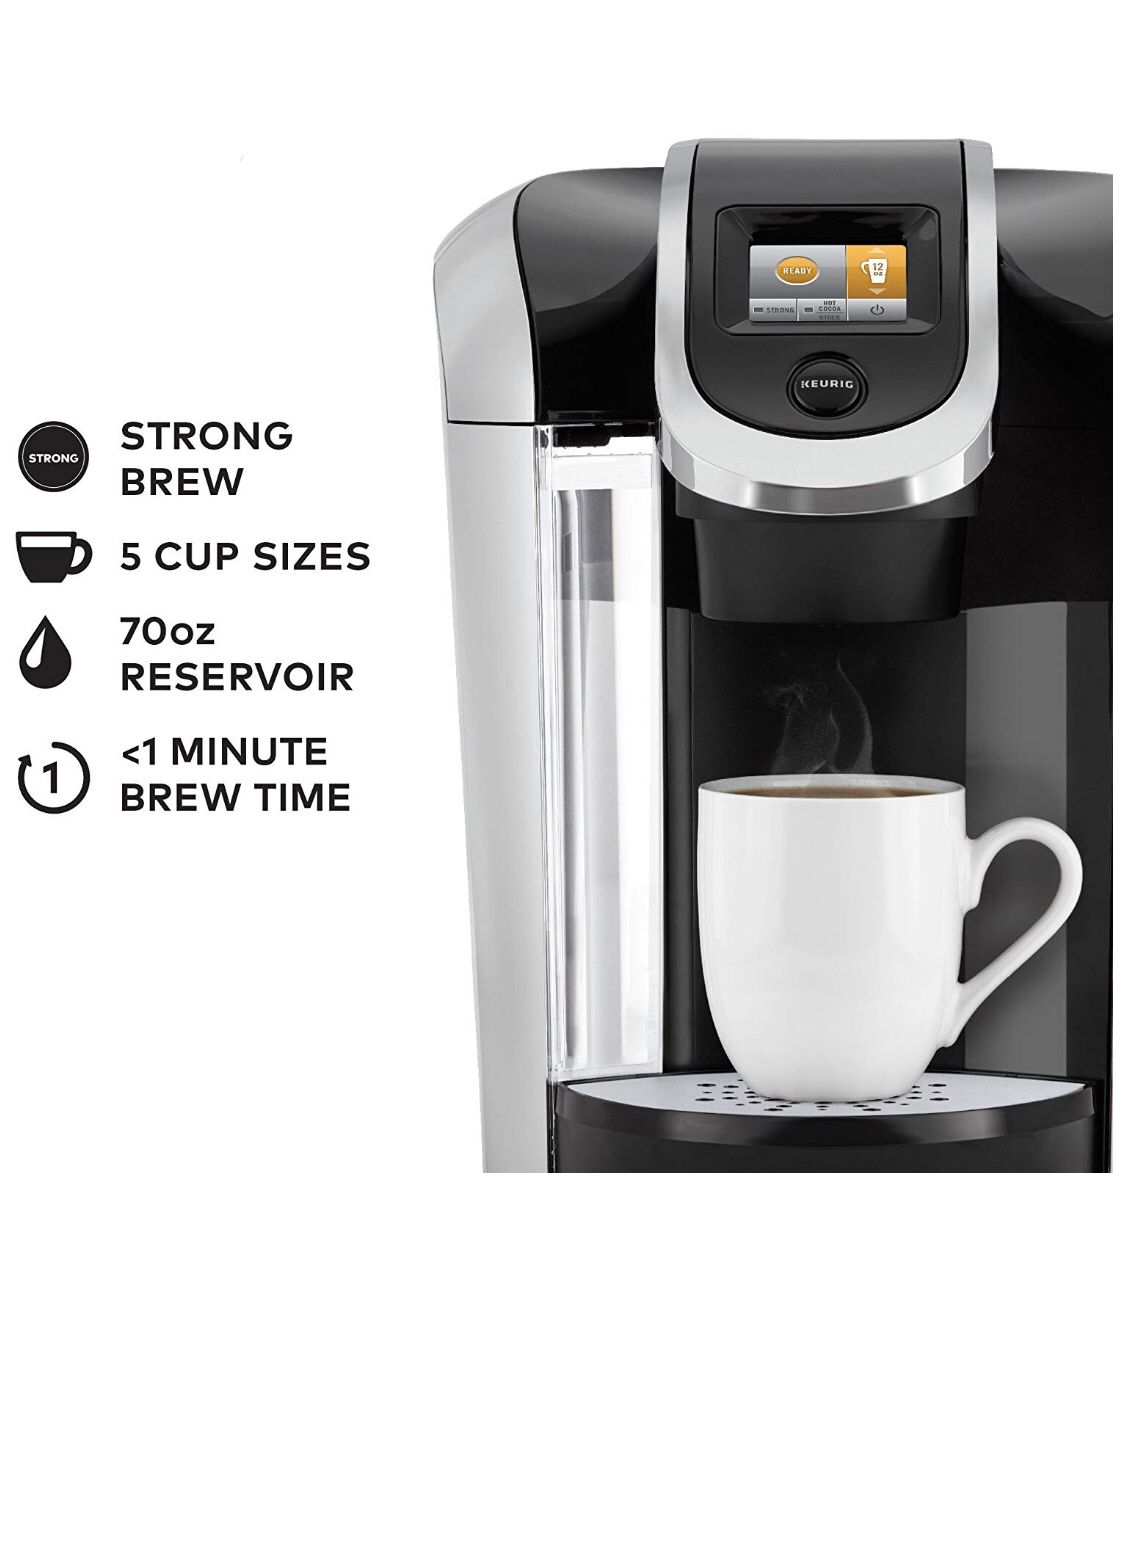 Keurig coffee maker with brand new coffee filter and water filter